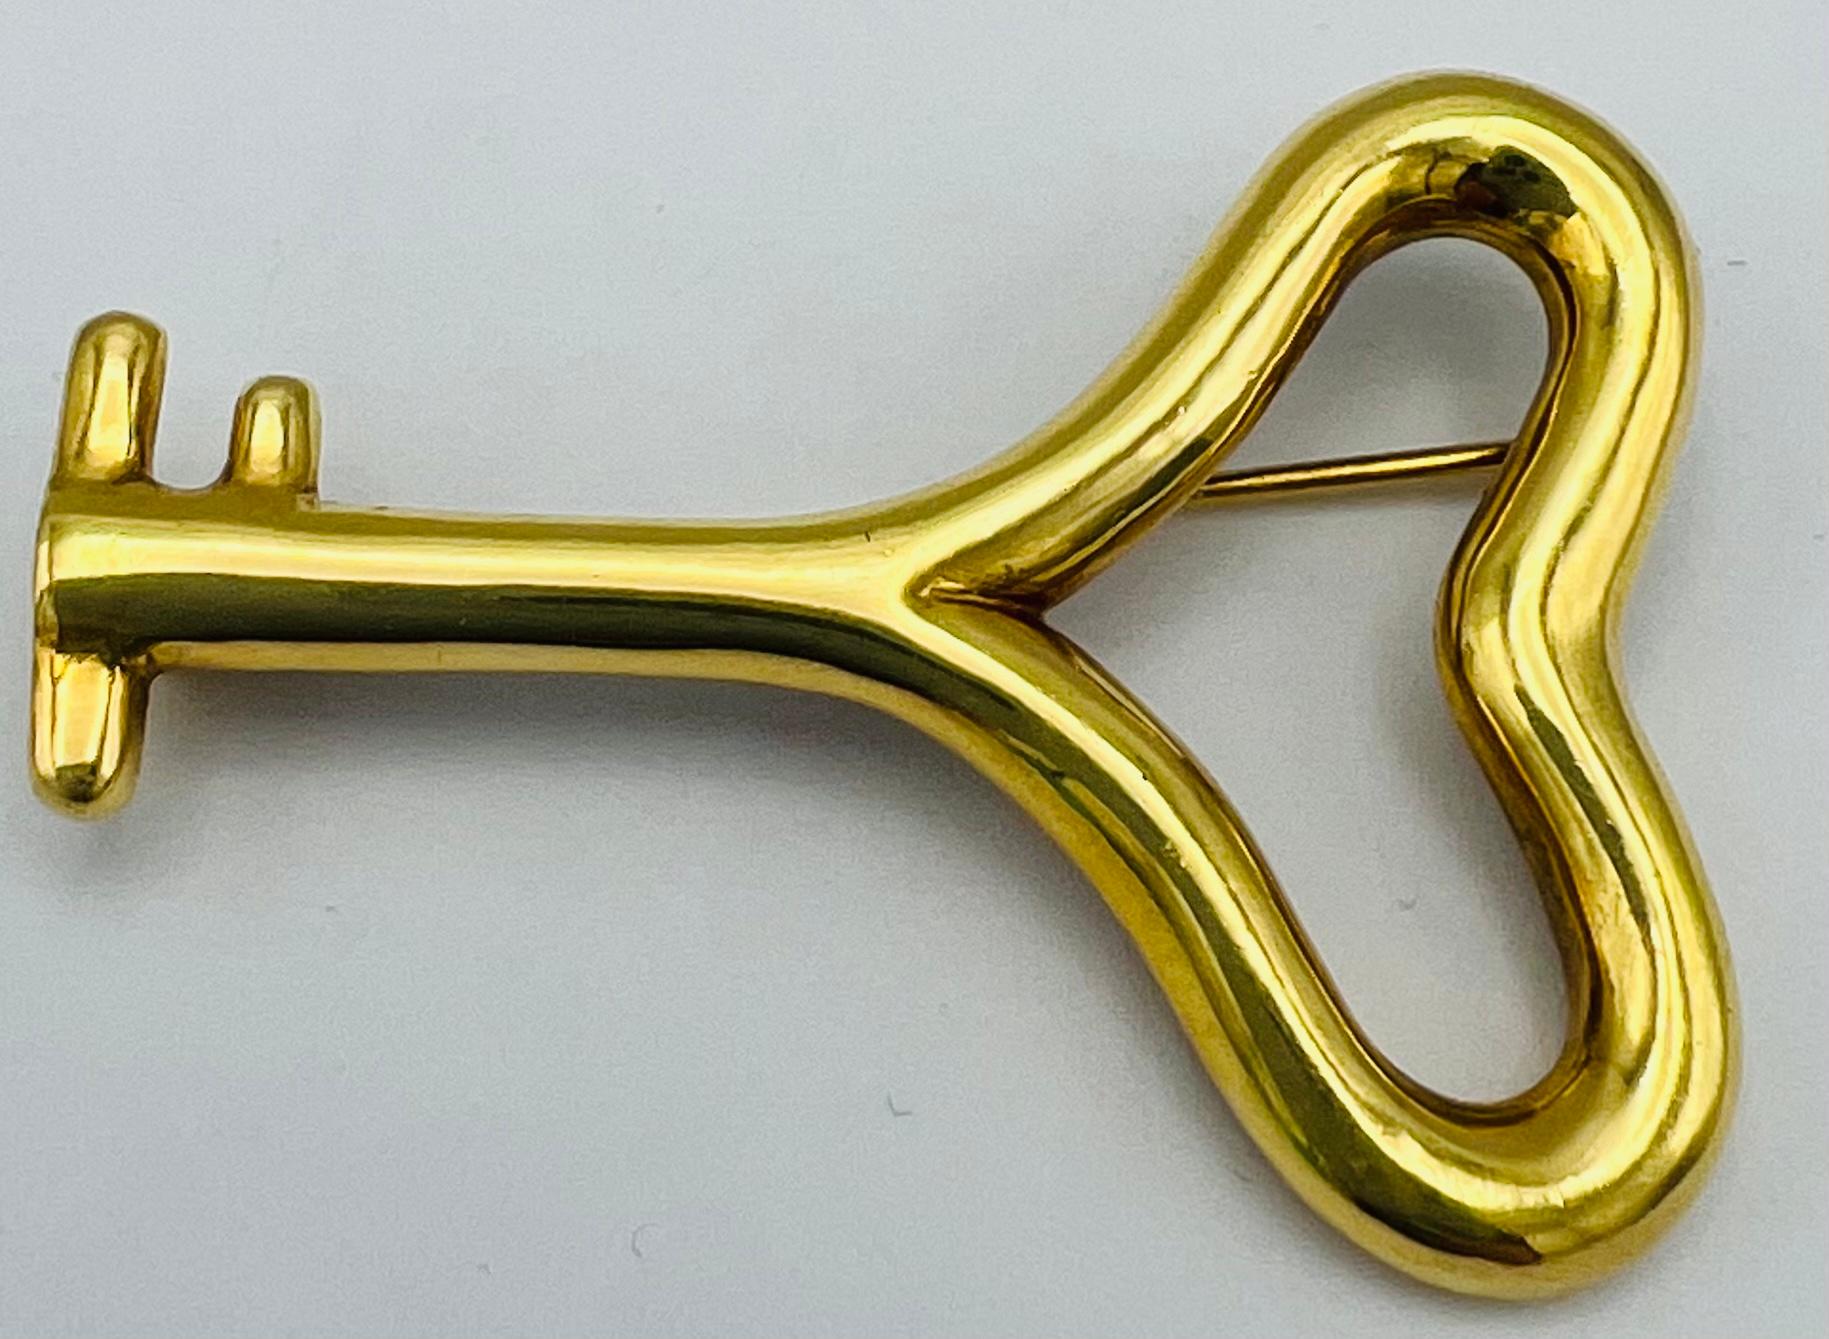 Product details:

The brooch is made out of 18k yellow gold.

Hallmarks: 1993, Cummings, 18K.
Weight is 12.0 grams.
The measurements are 1.75 inches long and 1.25 inches wide.

Note: the brooch can be converted into the pendant upon request.